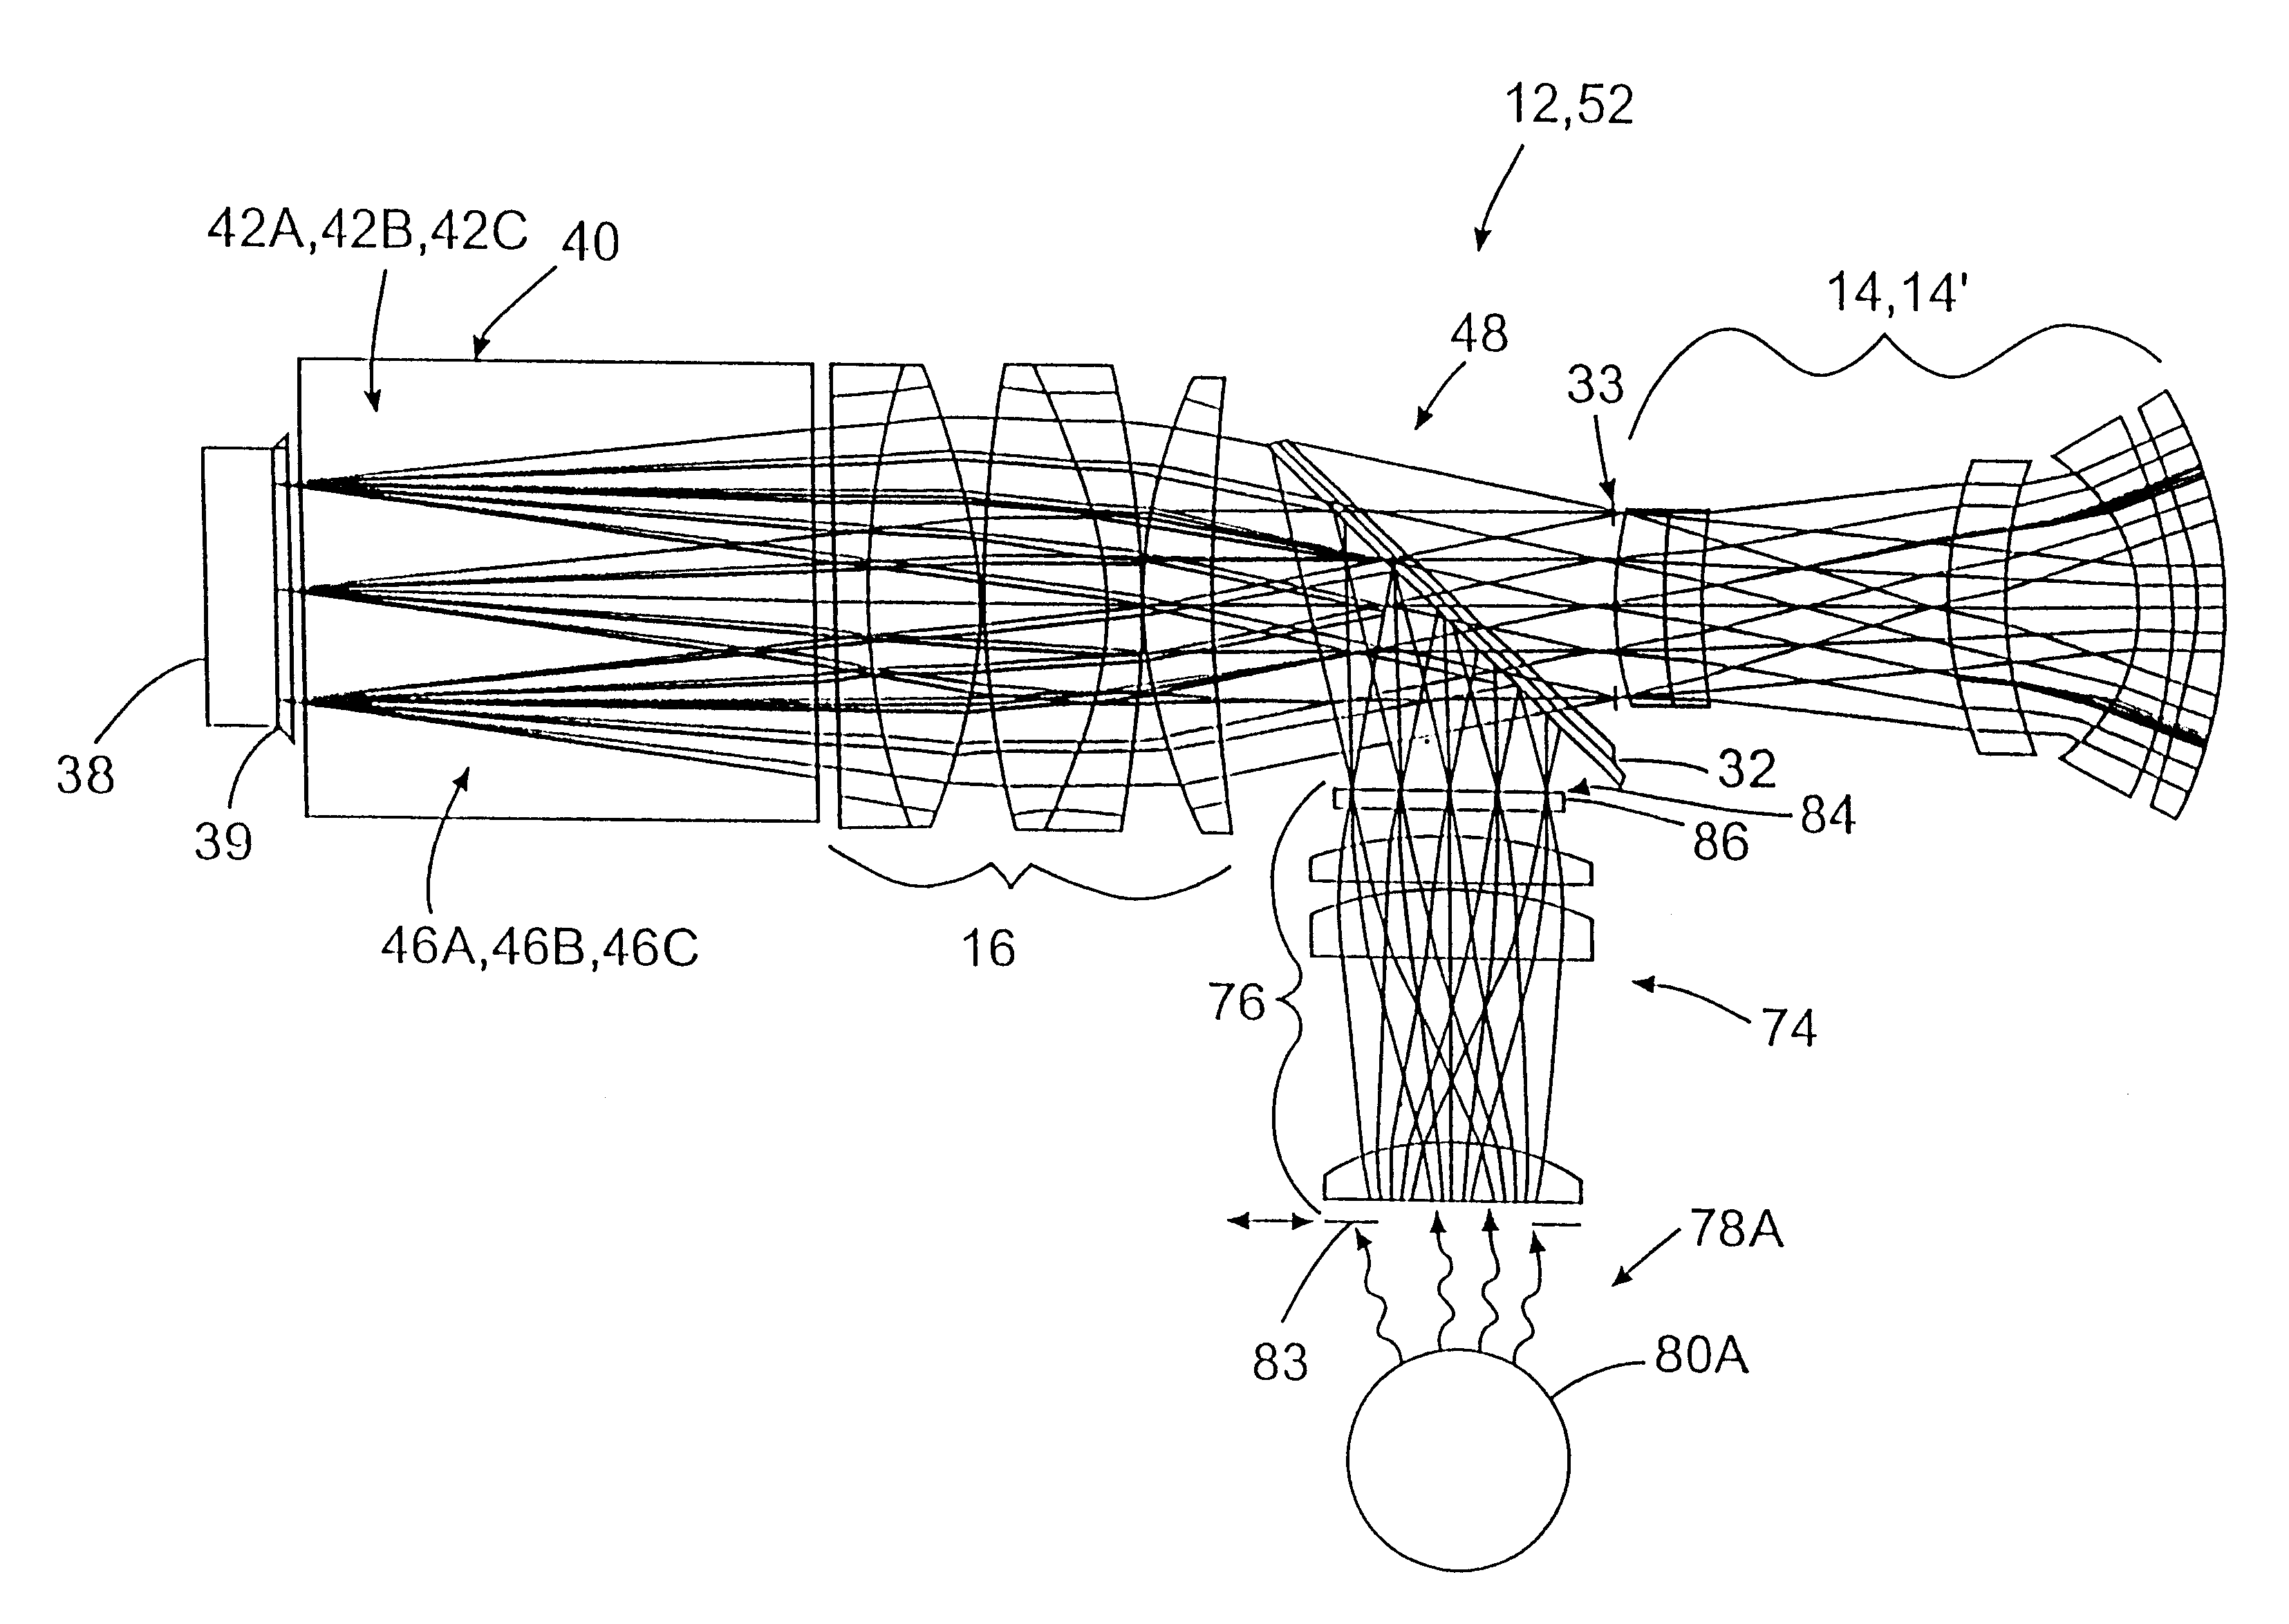 Thermalization using optical components in a lens system